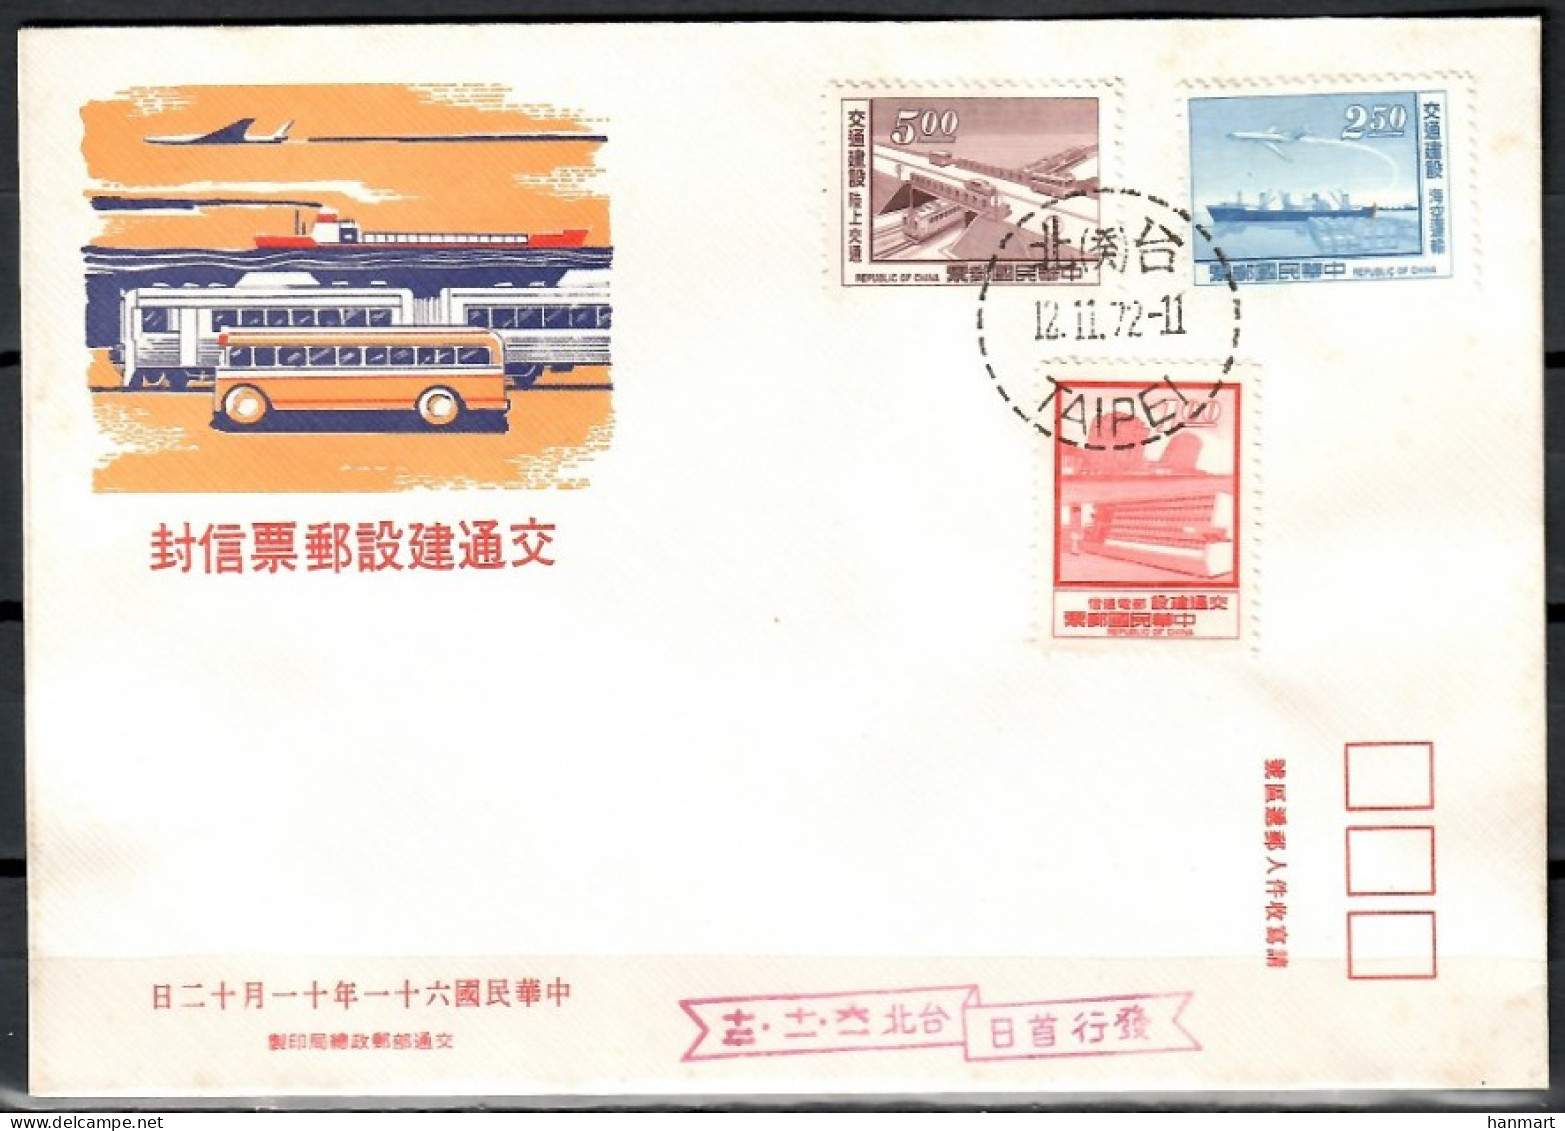 Taiwan (Republic Of China) 1972 Mi 926-928 FDC  (FDC ZS9 FRM926-928) - Voitures